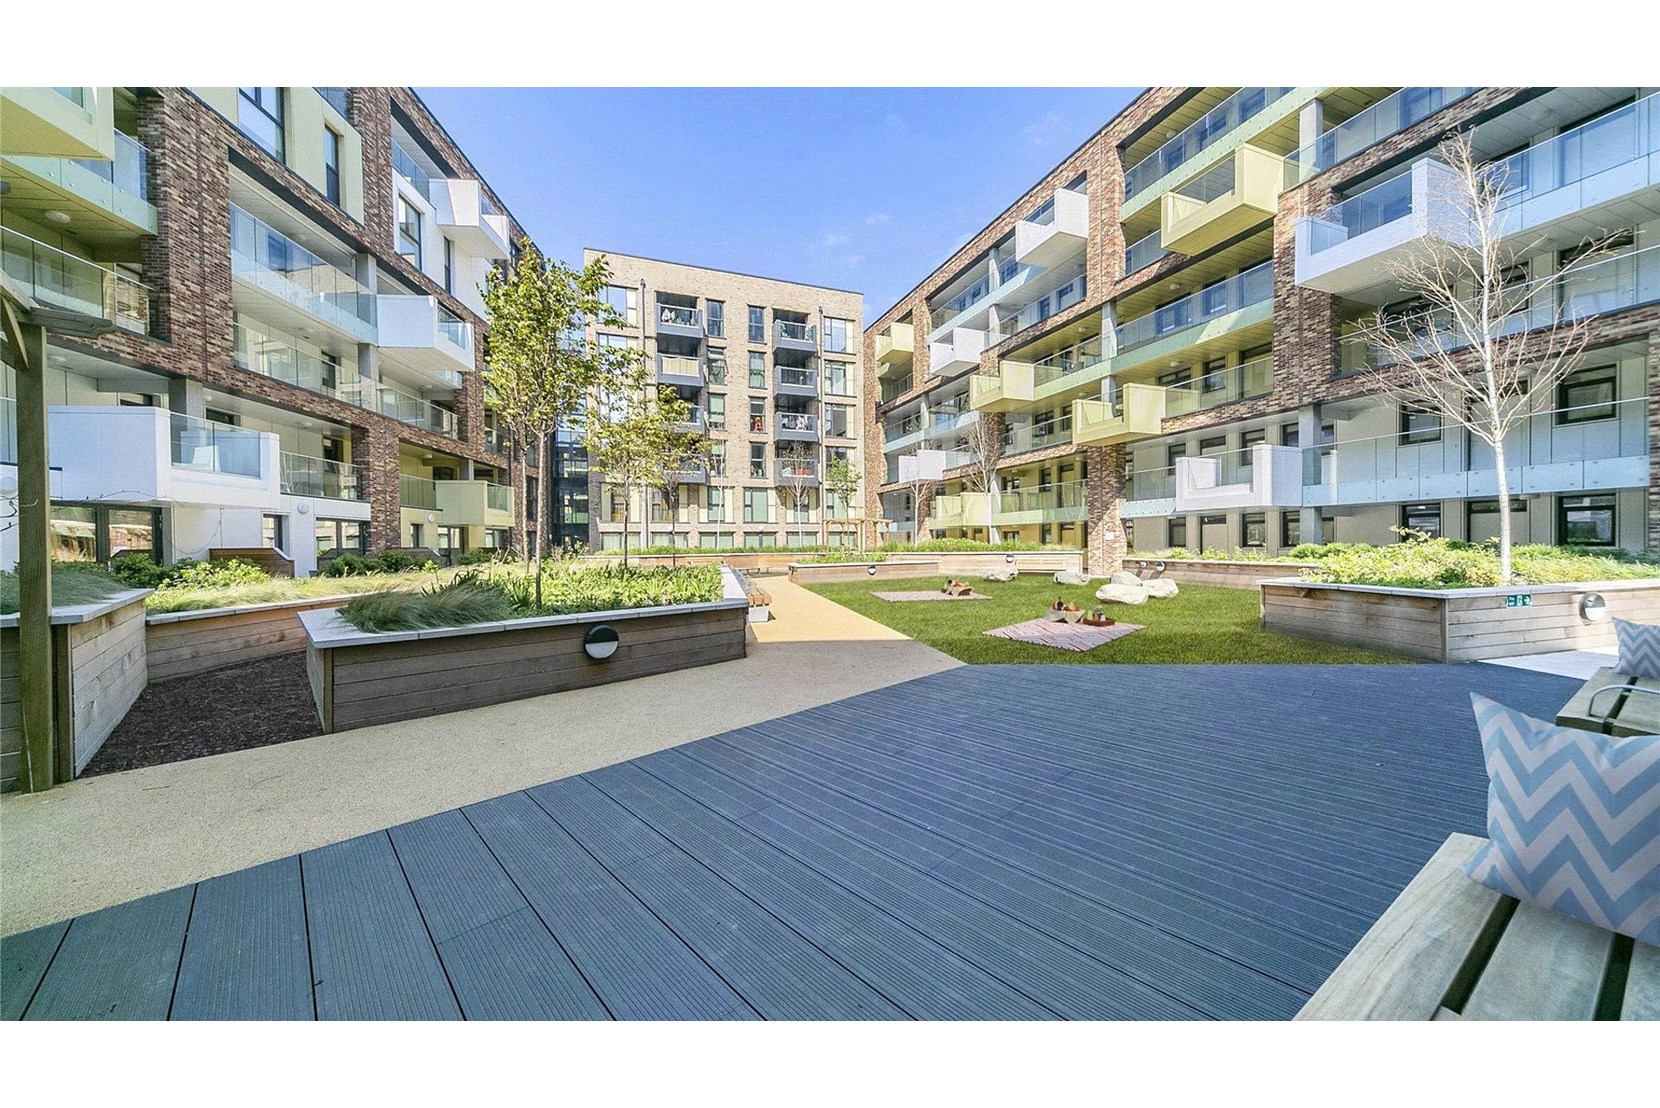 Apartments to Rent by JLL at The Horizon, Lewisham, SE10, communal gardens